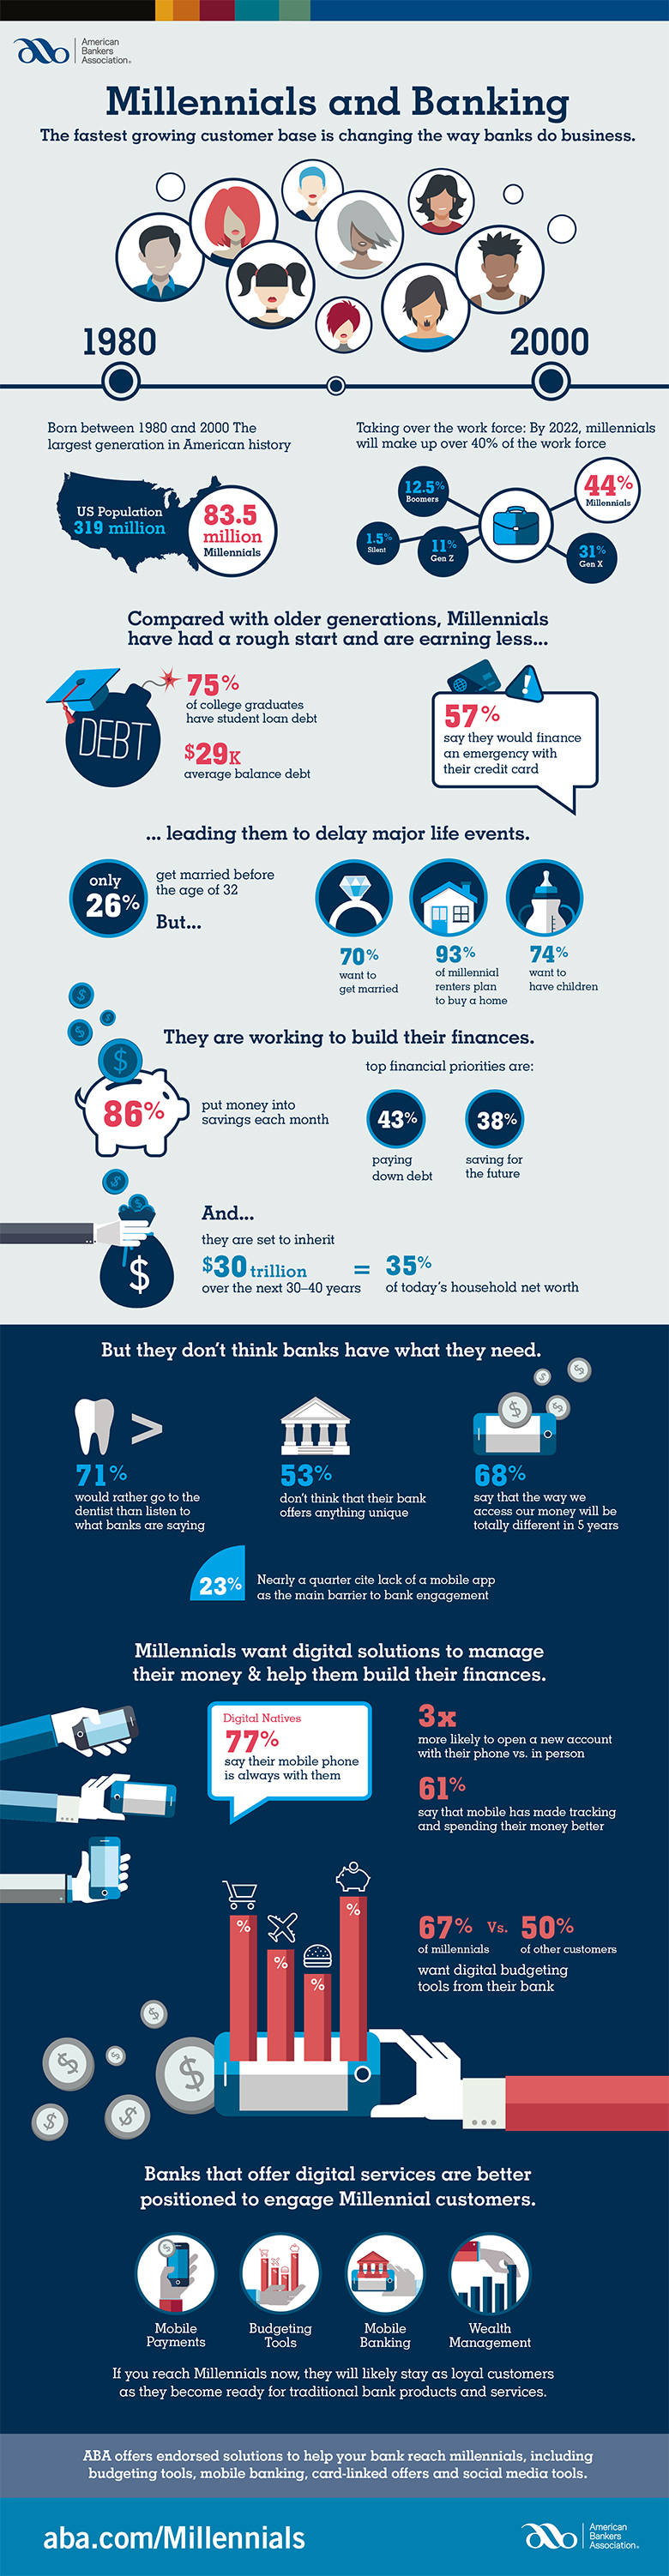 Millennials and banking infographic